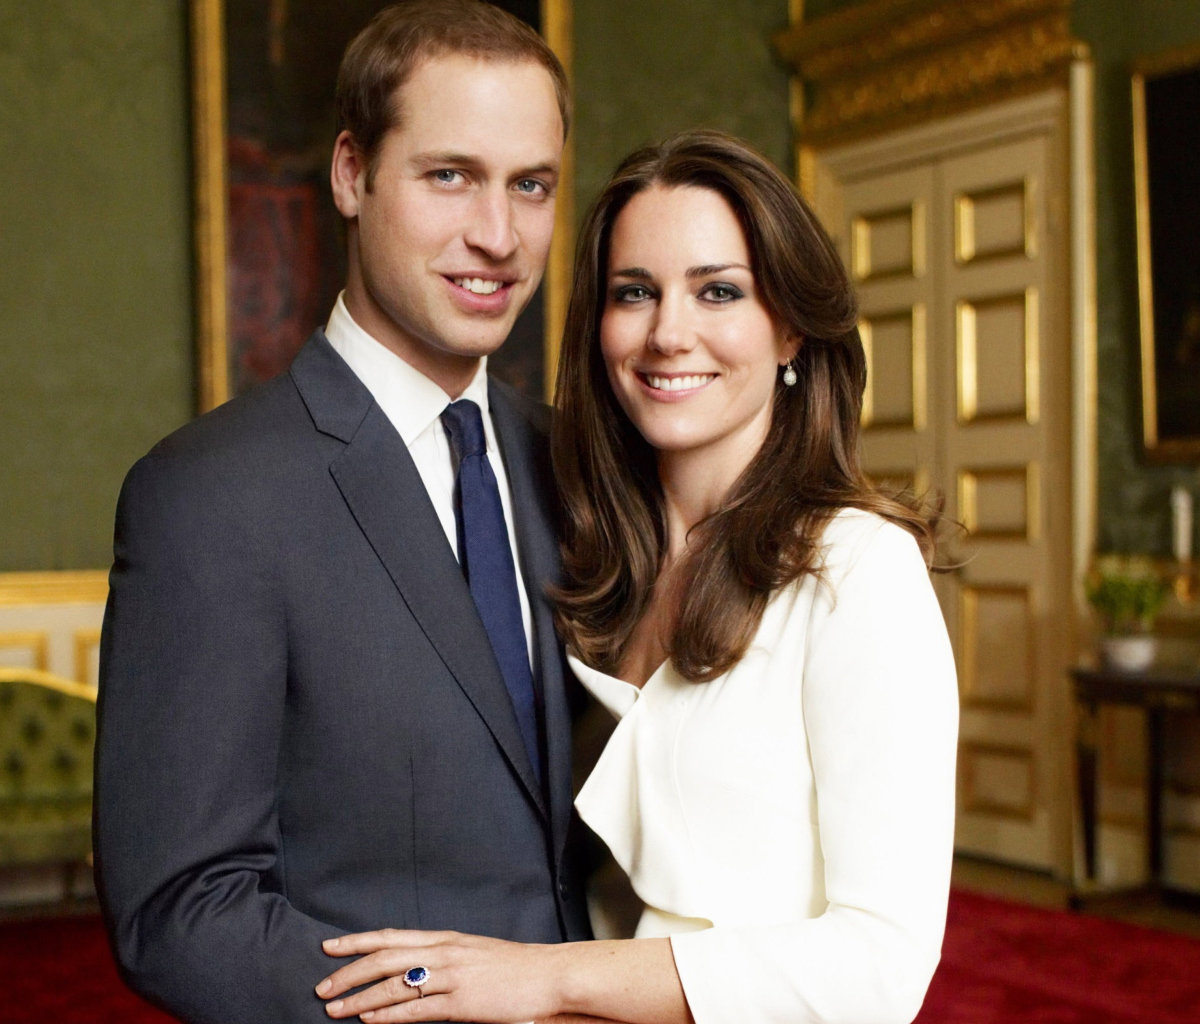 Prince William And Kate Middleton wallpaper 1200x1024